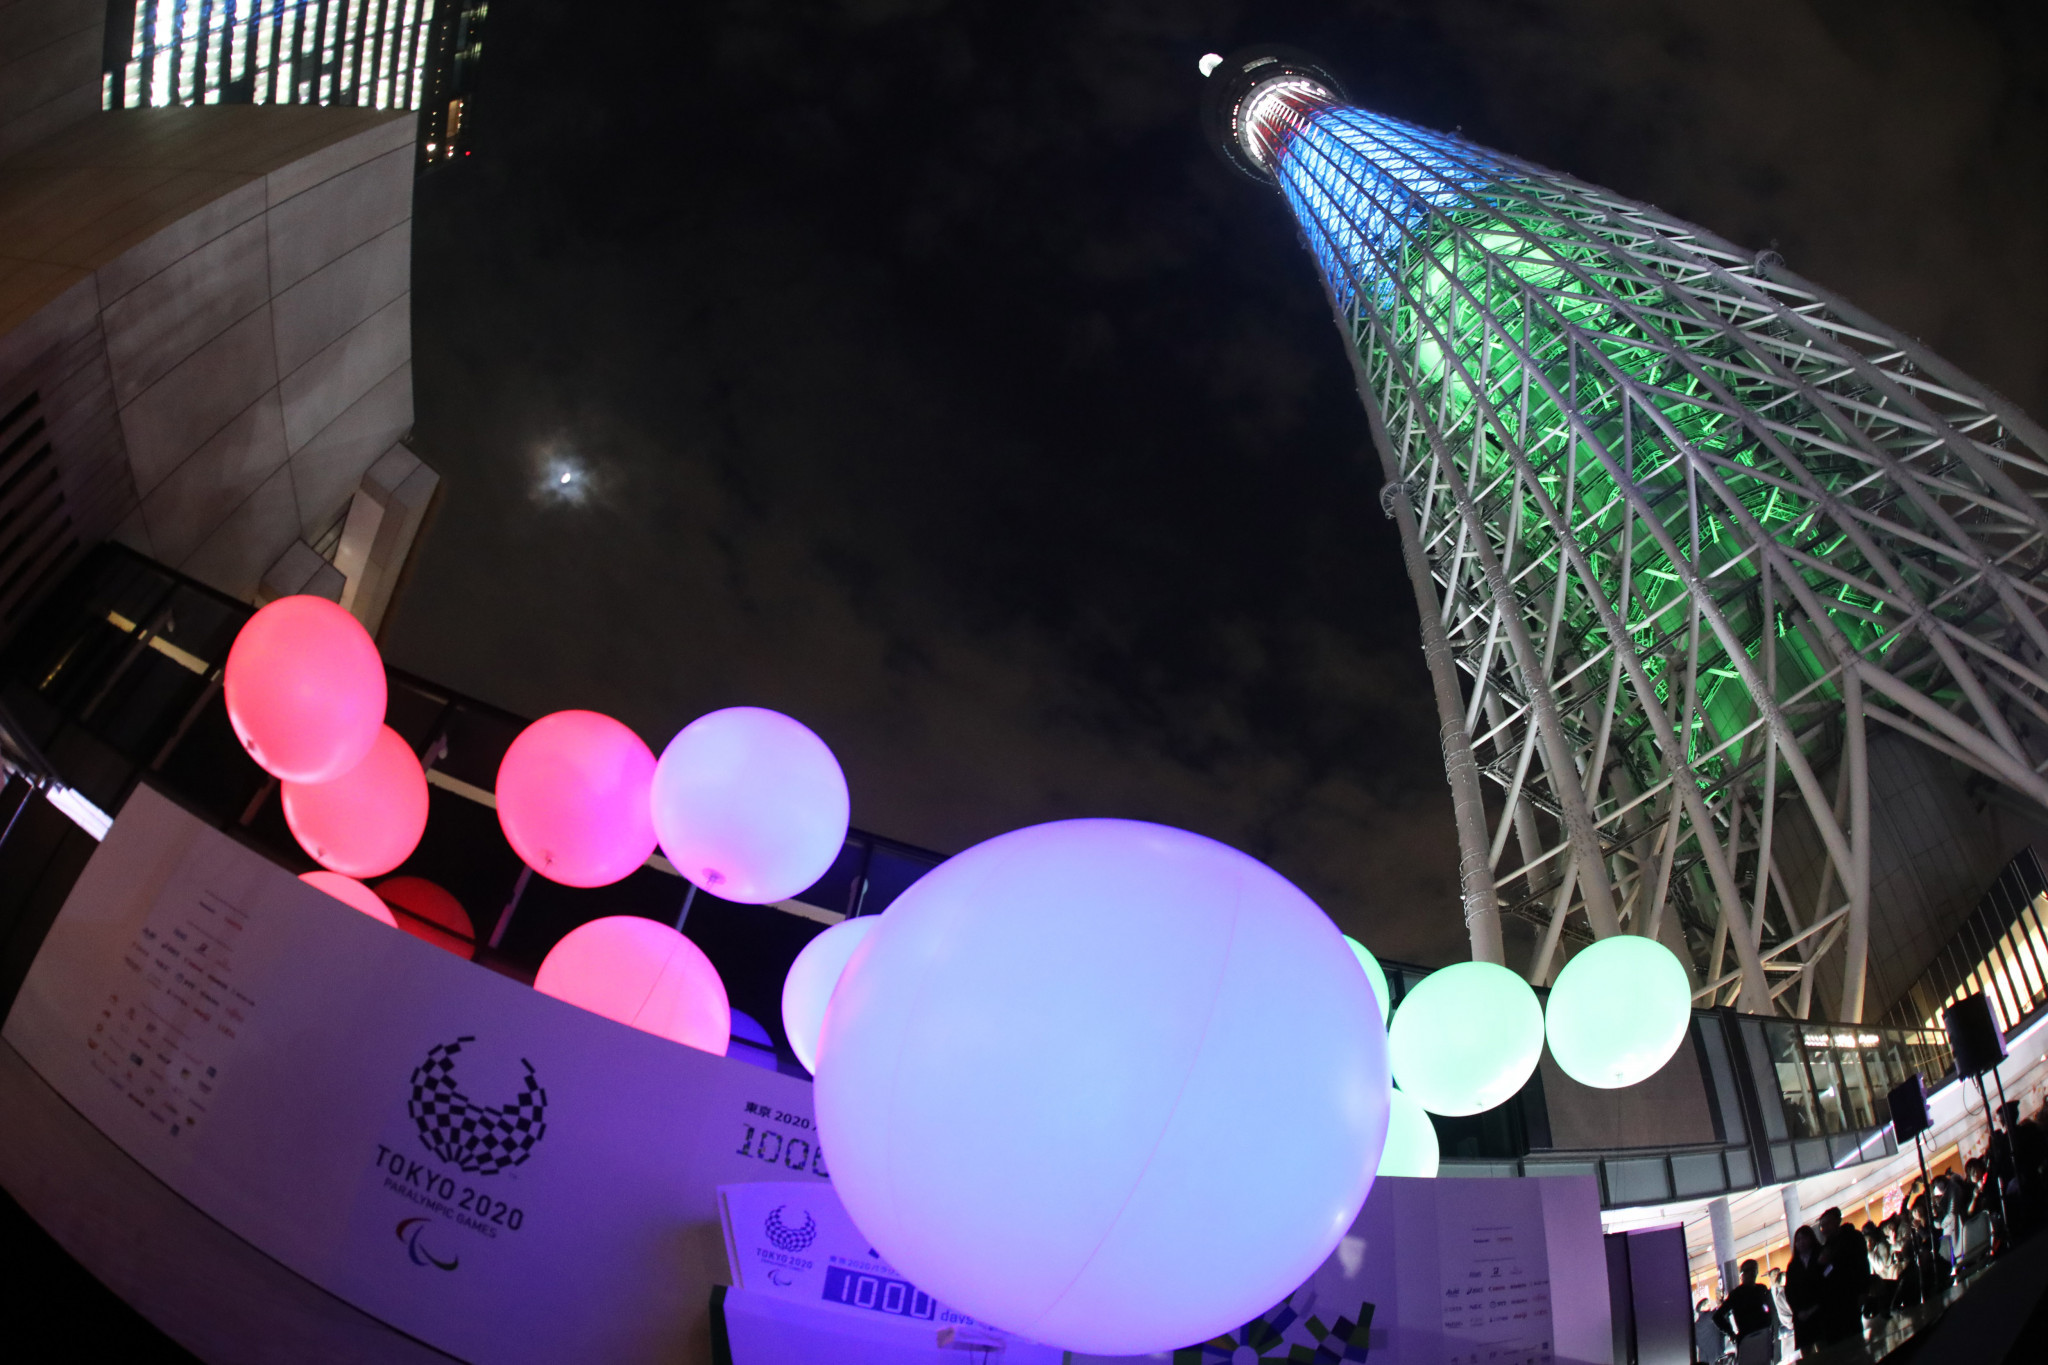 A celebratory event has been held in Tokyo to mark 1,000 days until the start of the 2020 Paralympic Games ©Tokyo 2020